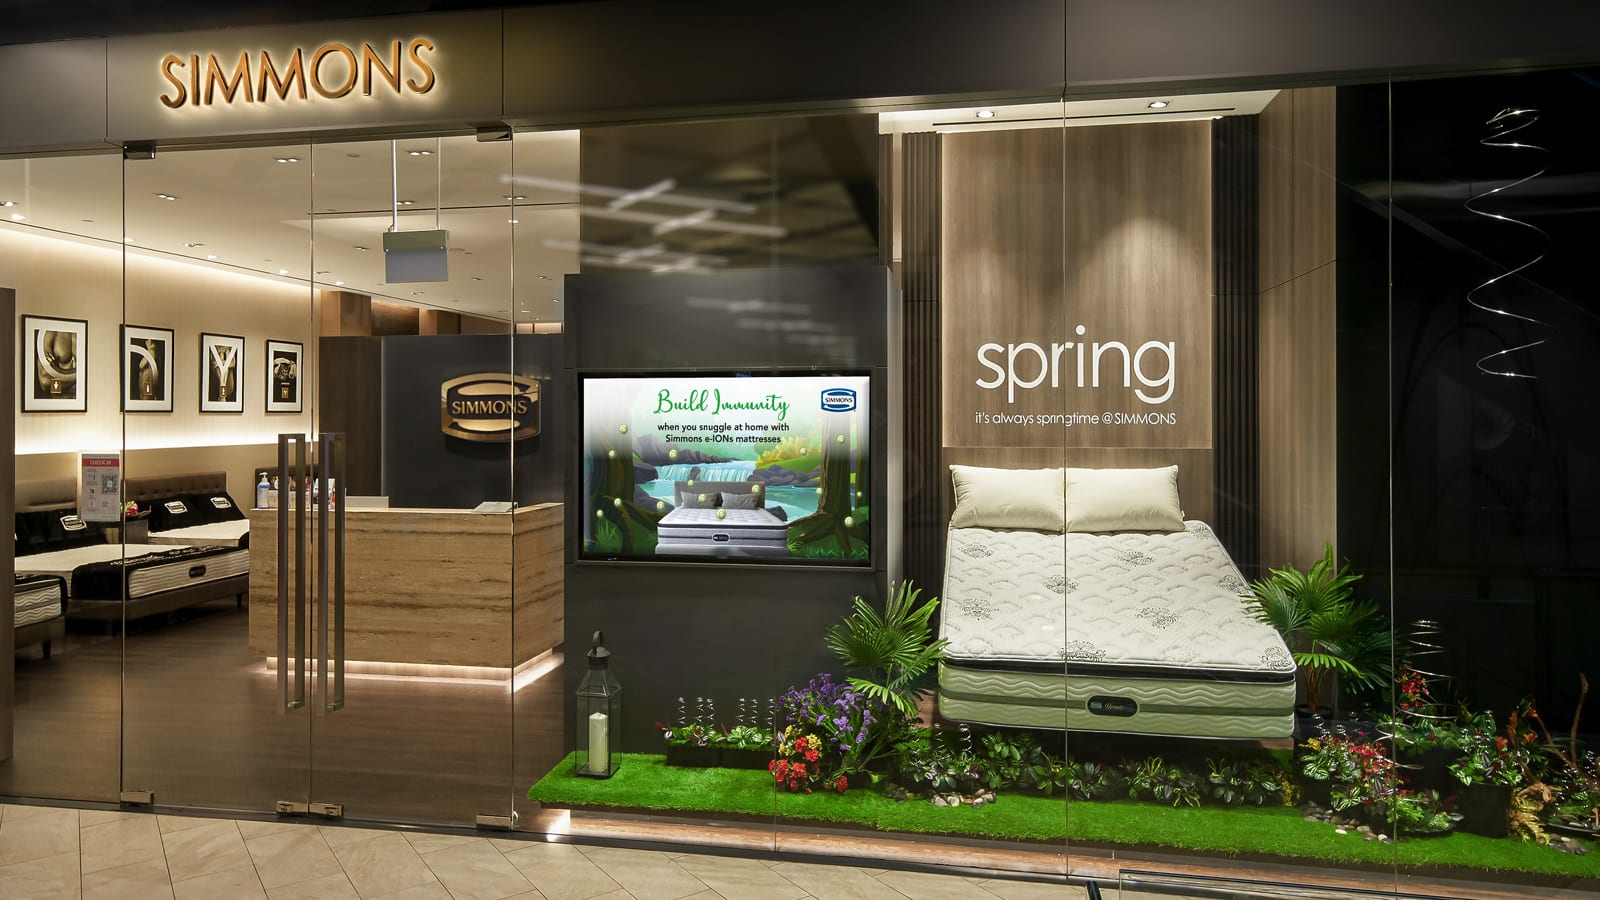 Wake to spring every day when you discover sound sleep with Simmons 